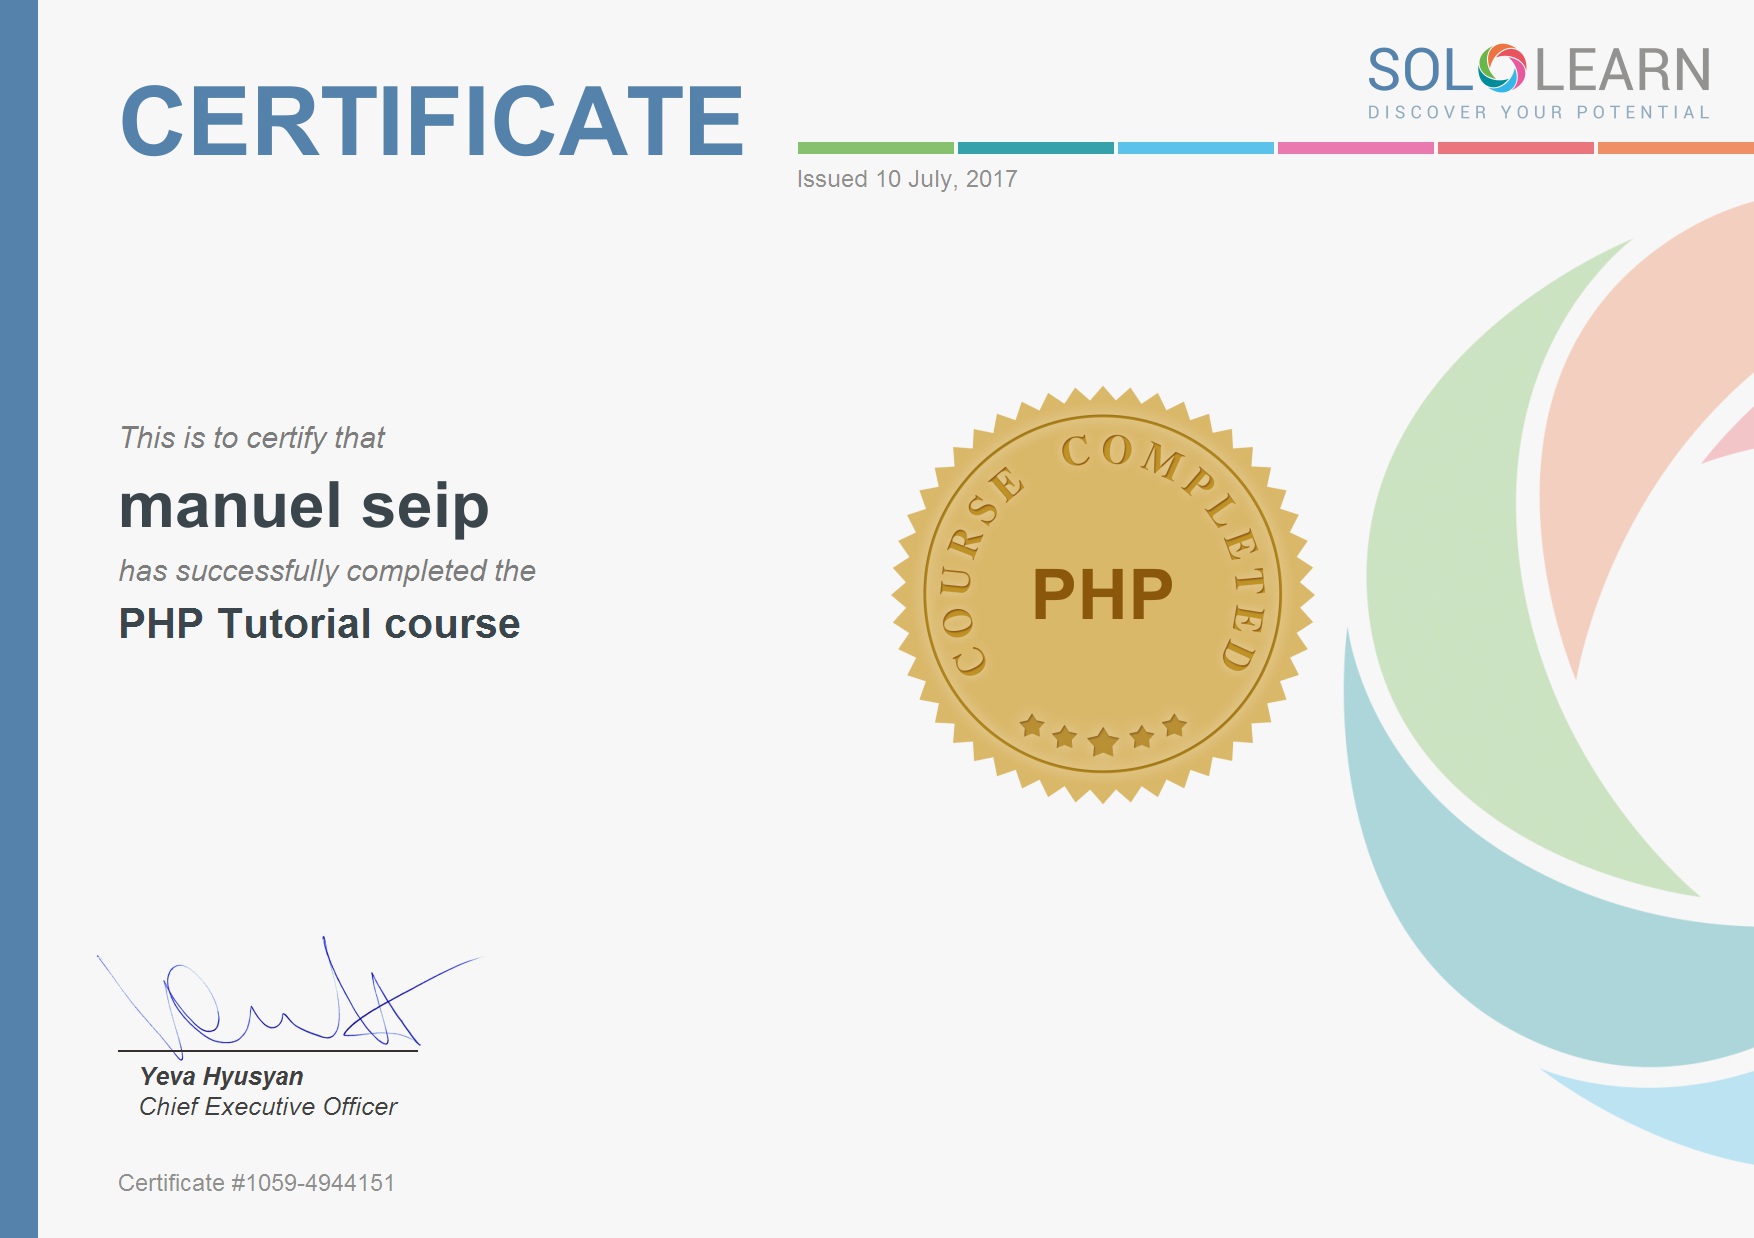 PHP Tutorial Course Certificate from SoloLearn